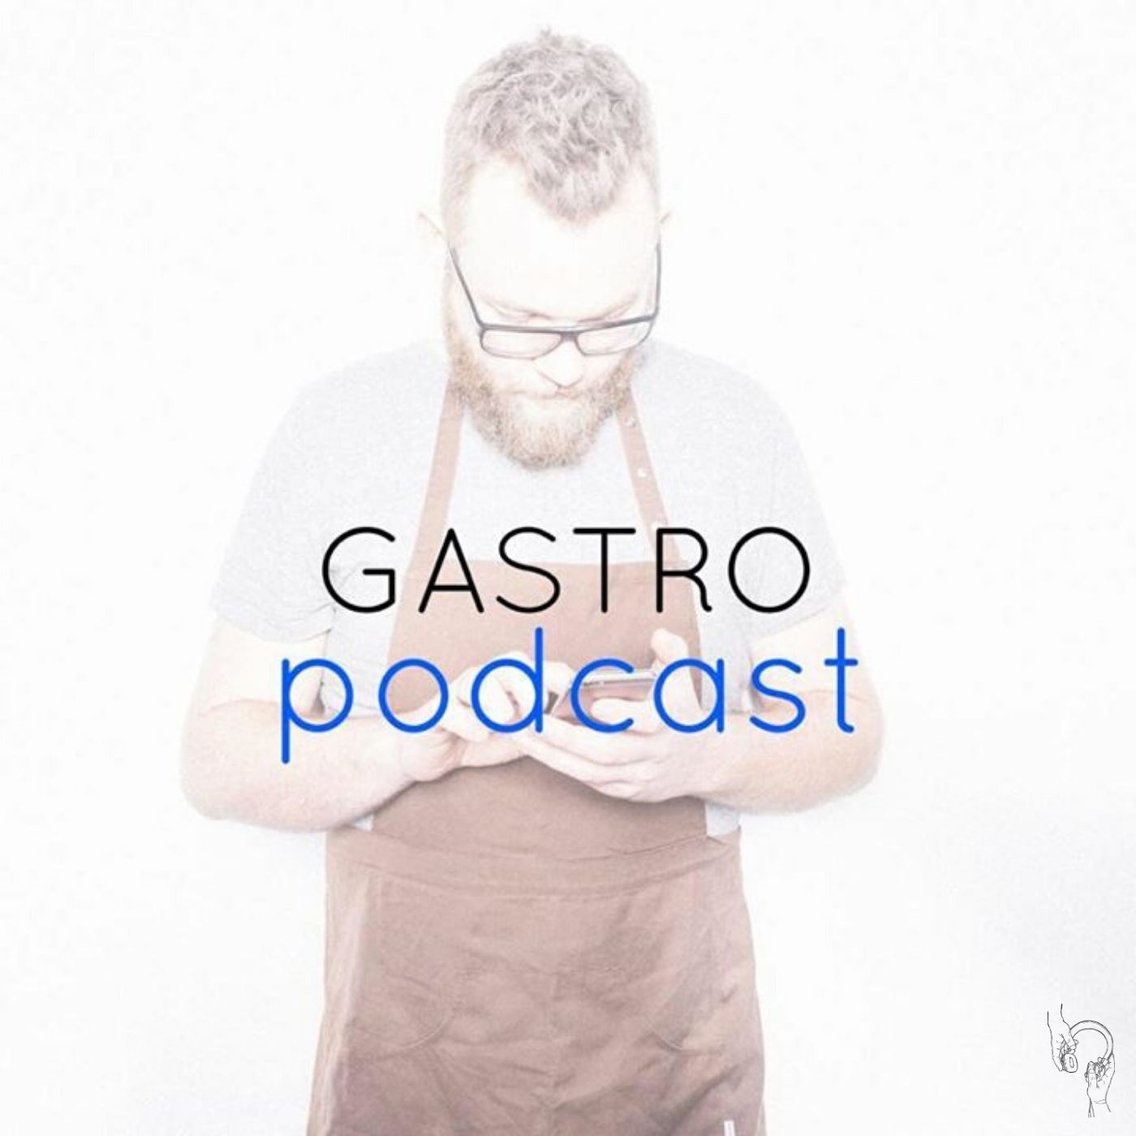 GASTROpodcast - Cover Image